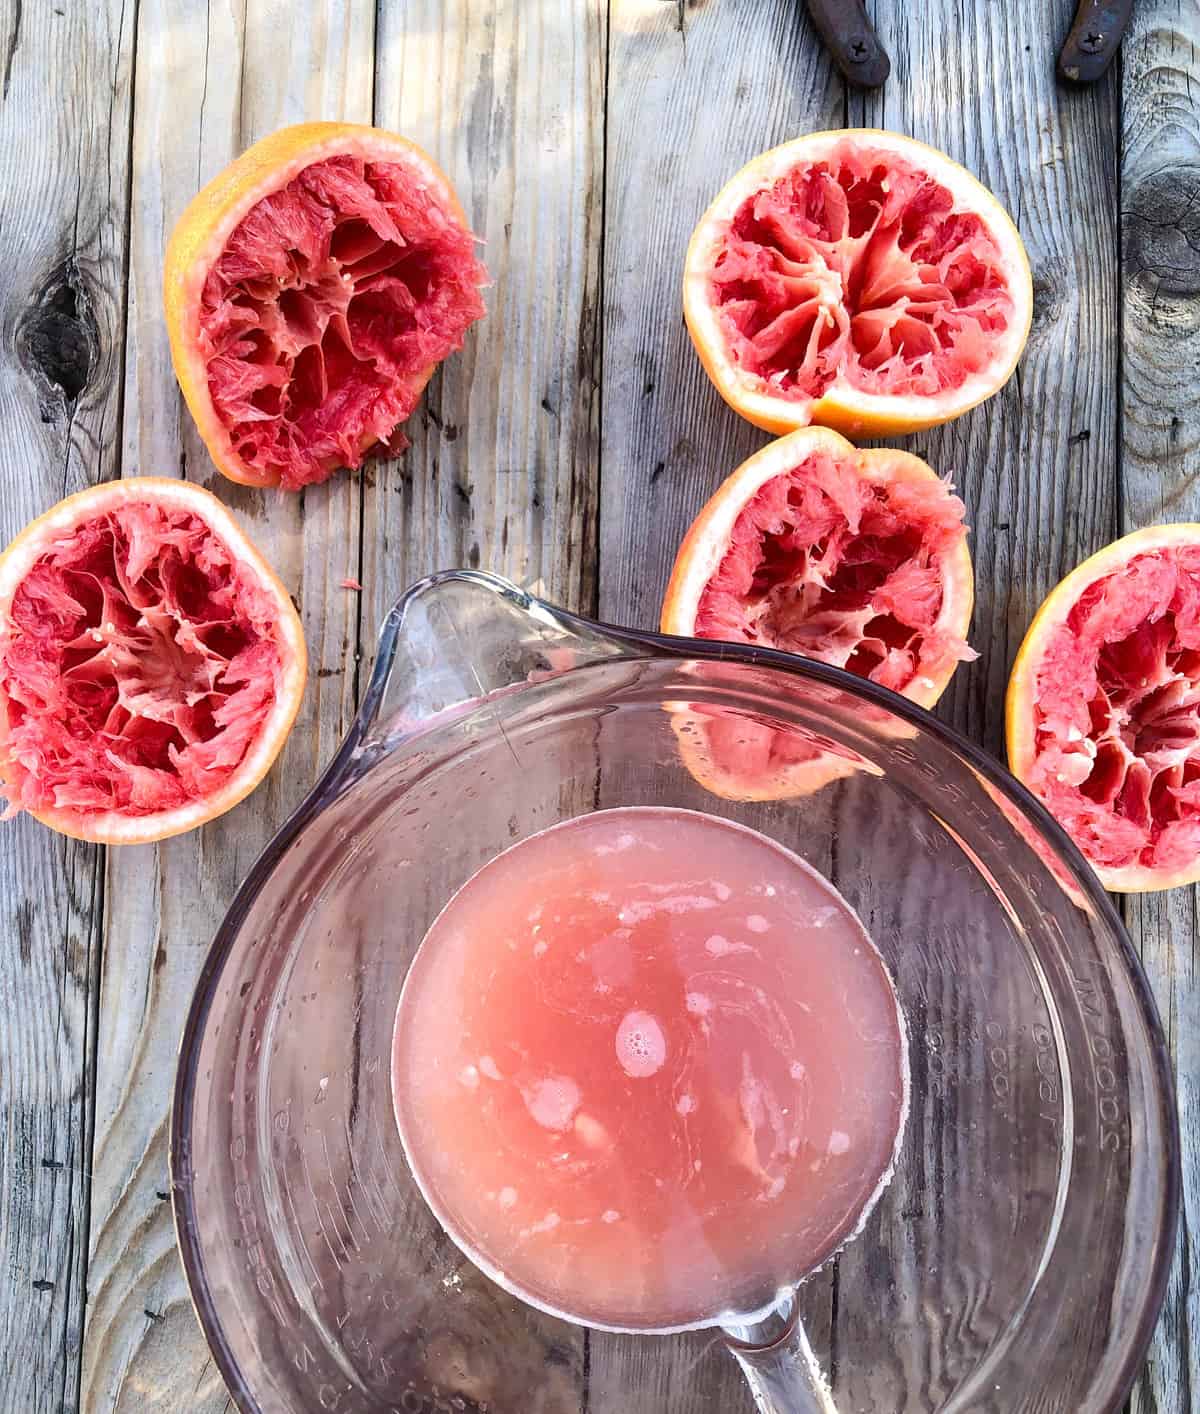 start with fresh, ripe California grapefruit.  I hand-squeezed 3 and that gave me enough juice (1.5 cups) for the recipe.